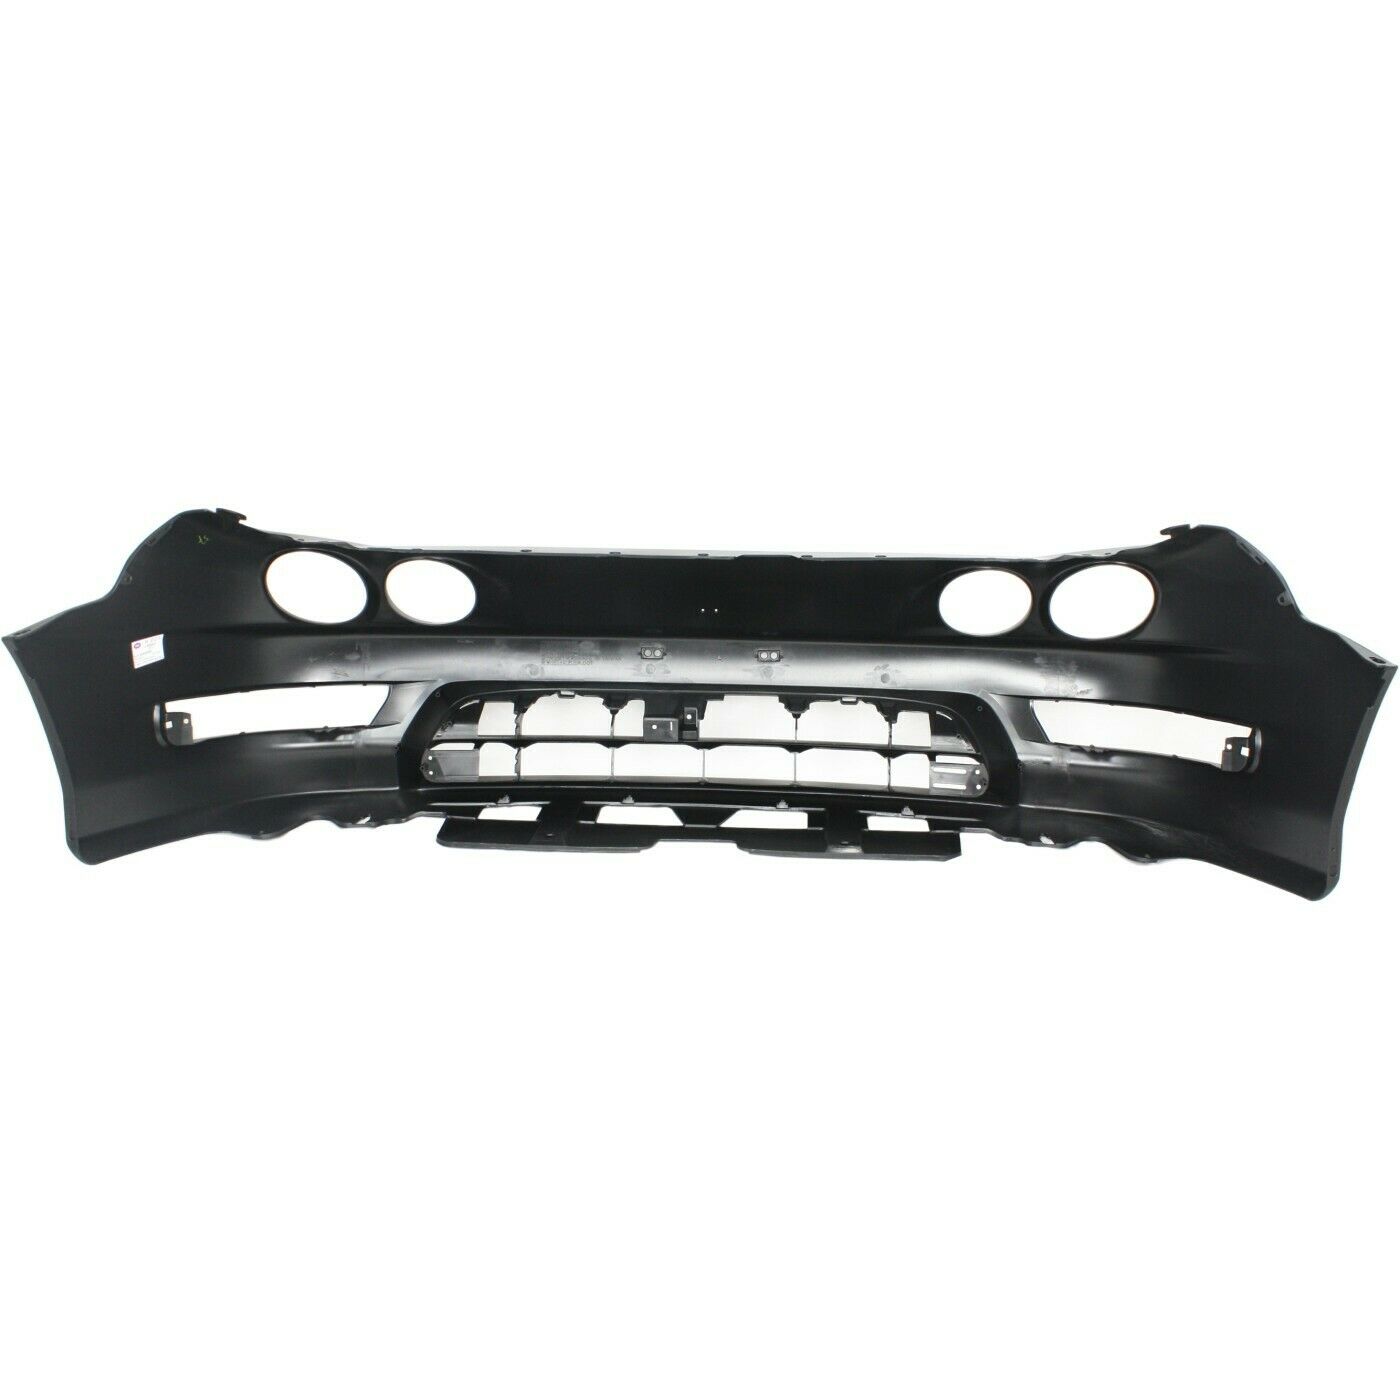 New Front Bumper Cover for Acura Integra AC1000130 1998 to 2001 